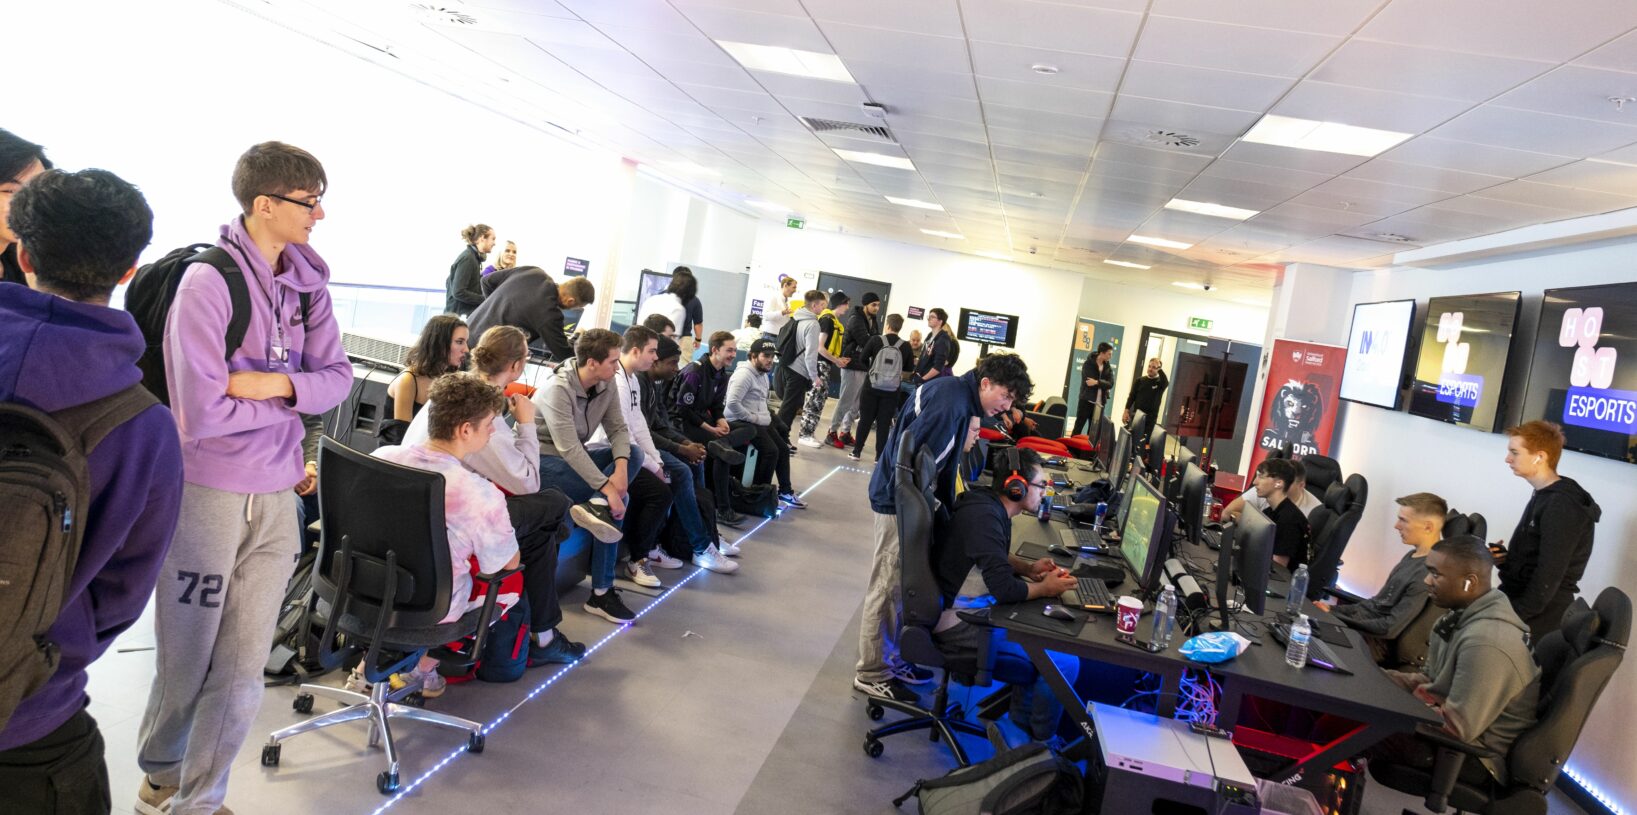 People gathered at Esports event